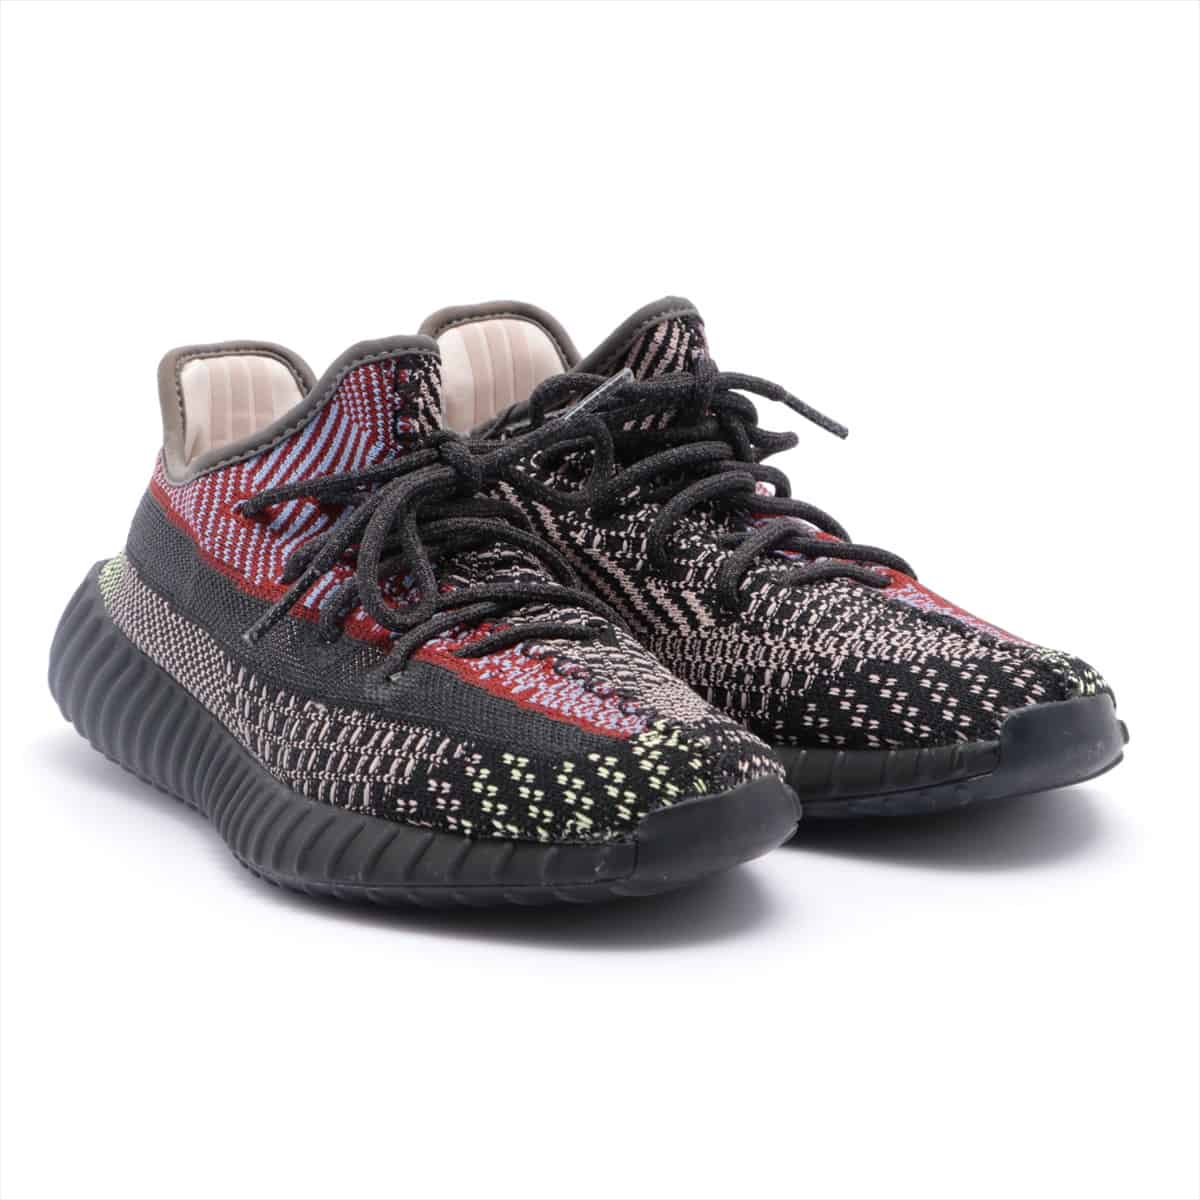 Adidas YEEZY BOOST 350 V2 Knit Sneakers 25.5cm Men's Multicolor FW5190